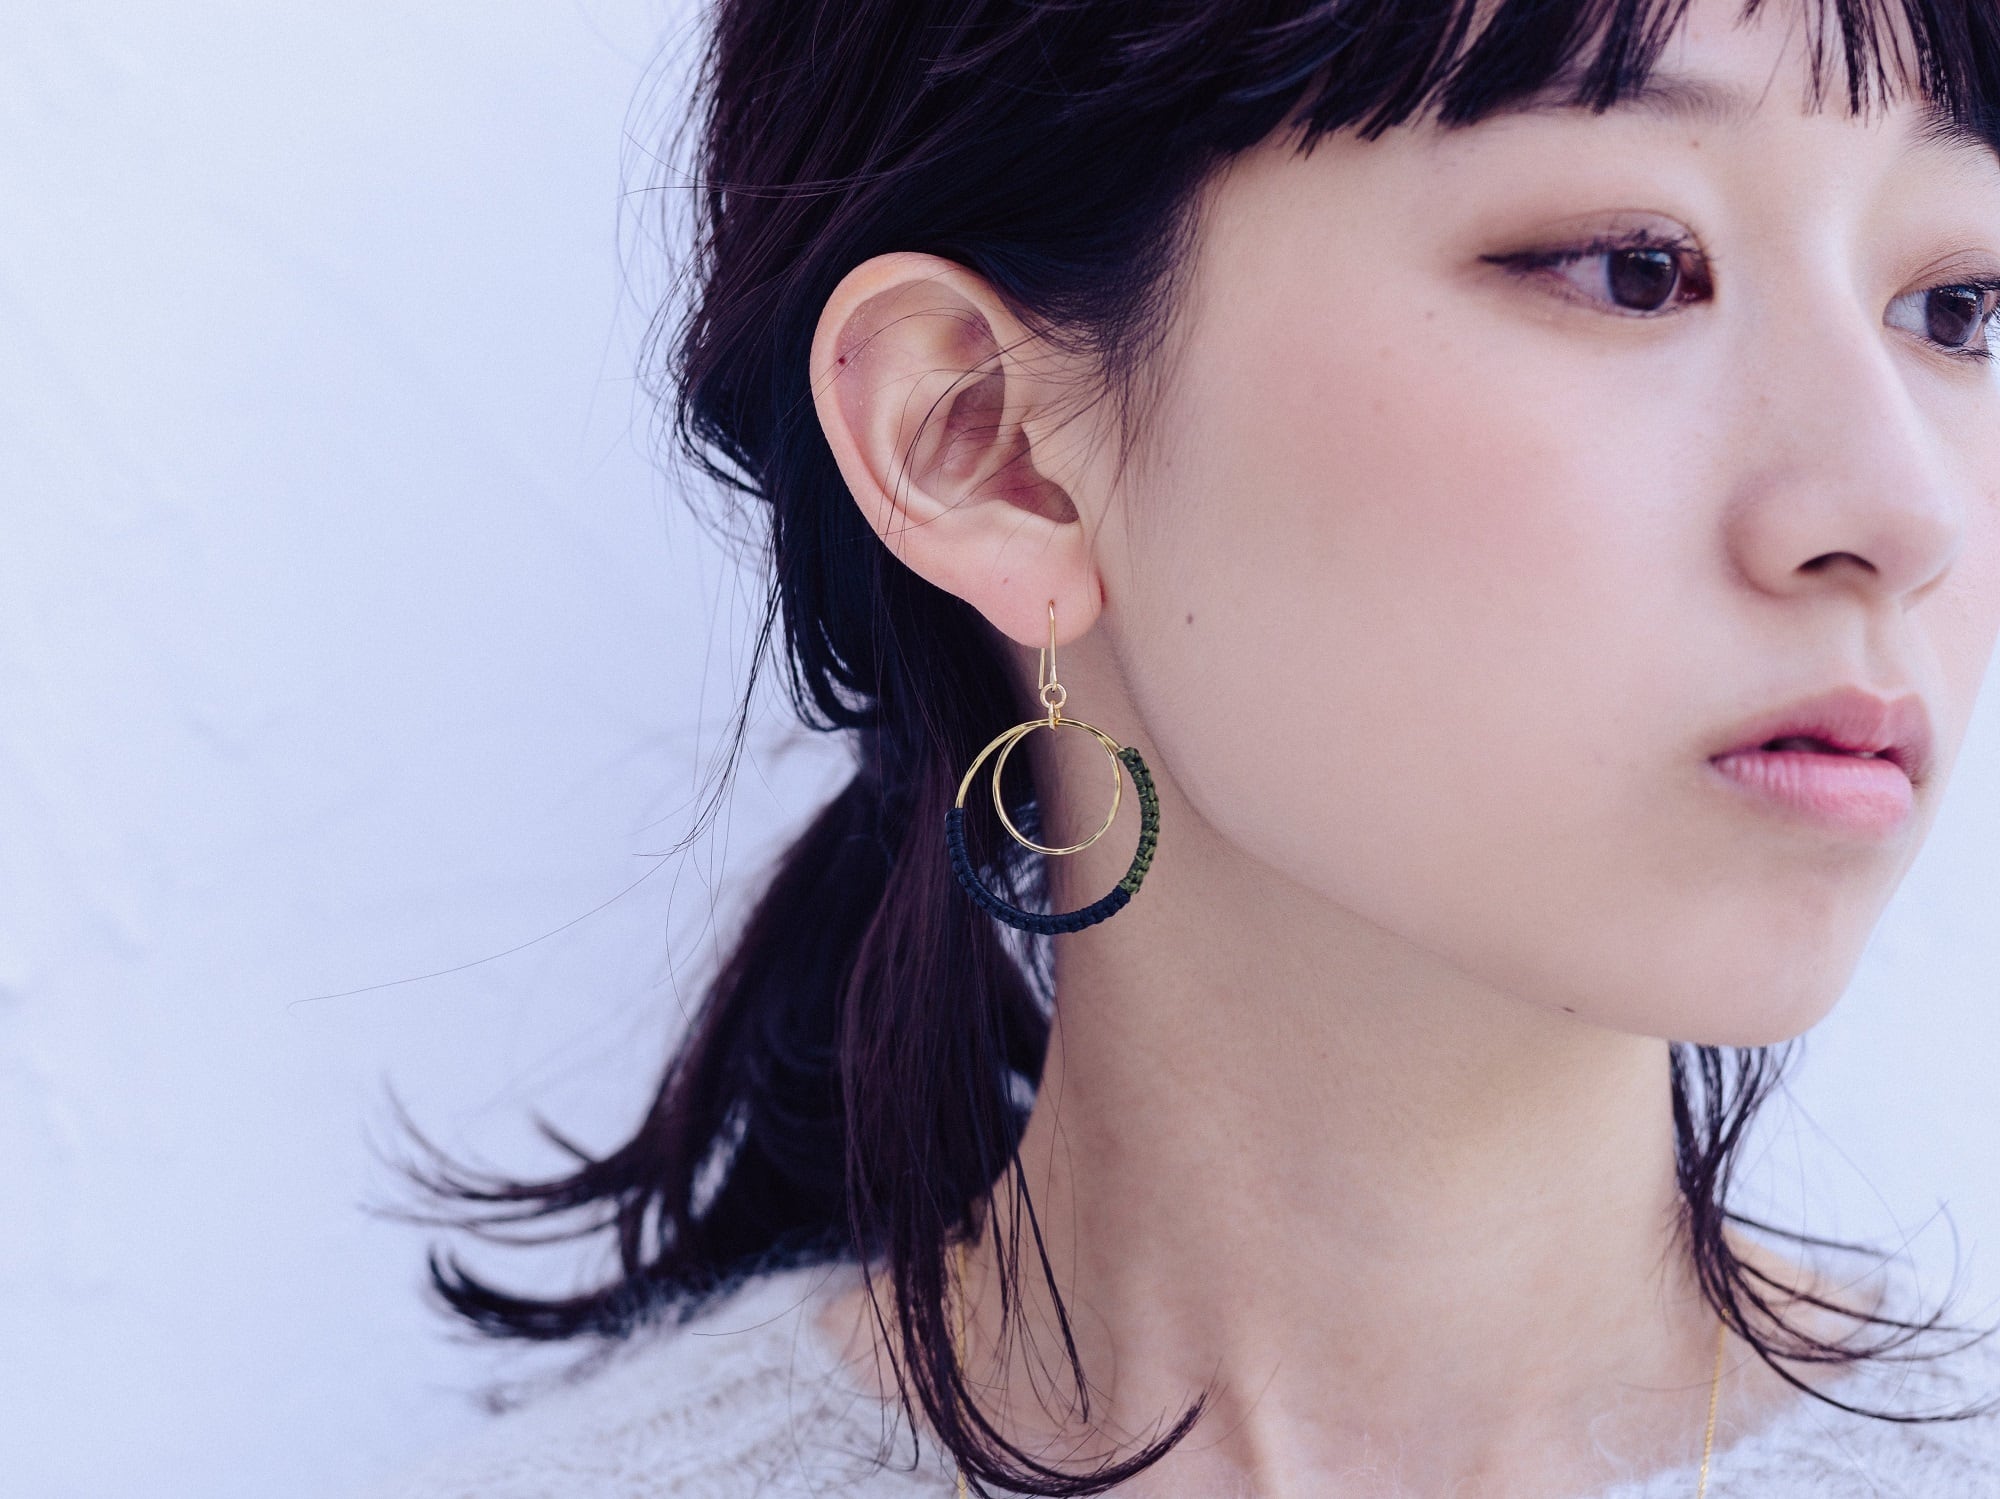 《niruc×KnottWorks》リングピアス/イヤリング・Brass/Double Ring Earrings×3colors